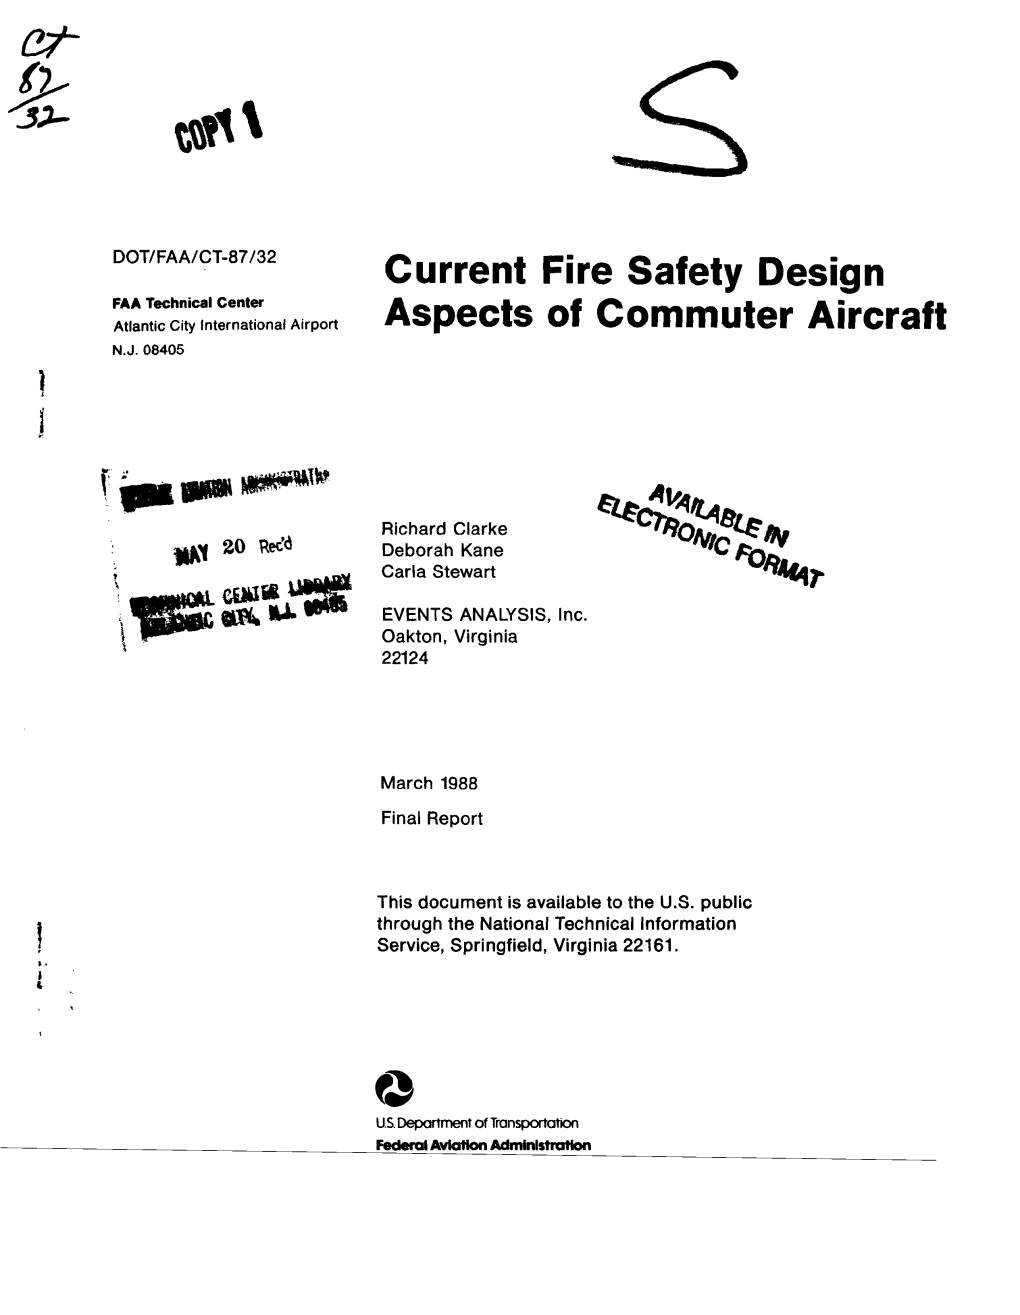 Current Fire Safety Design Aspects of Commuter Aircraft Was to Develop a List of Aircraft for Which Fire Safety Design Details Would Be Determined